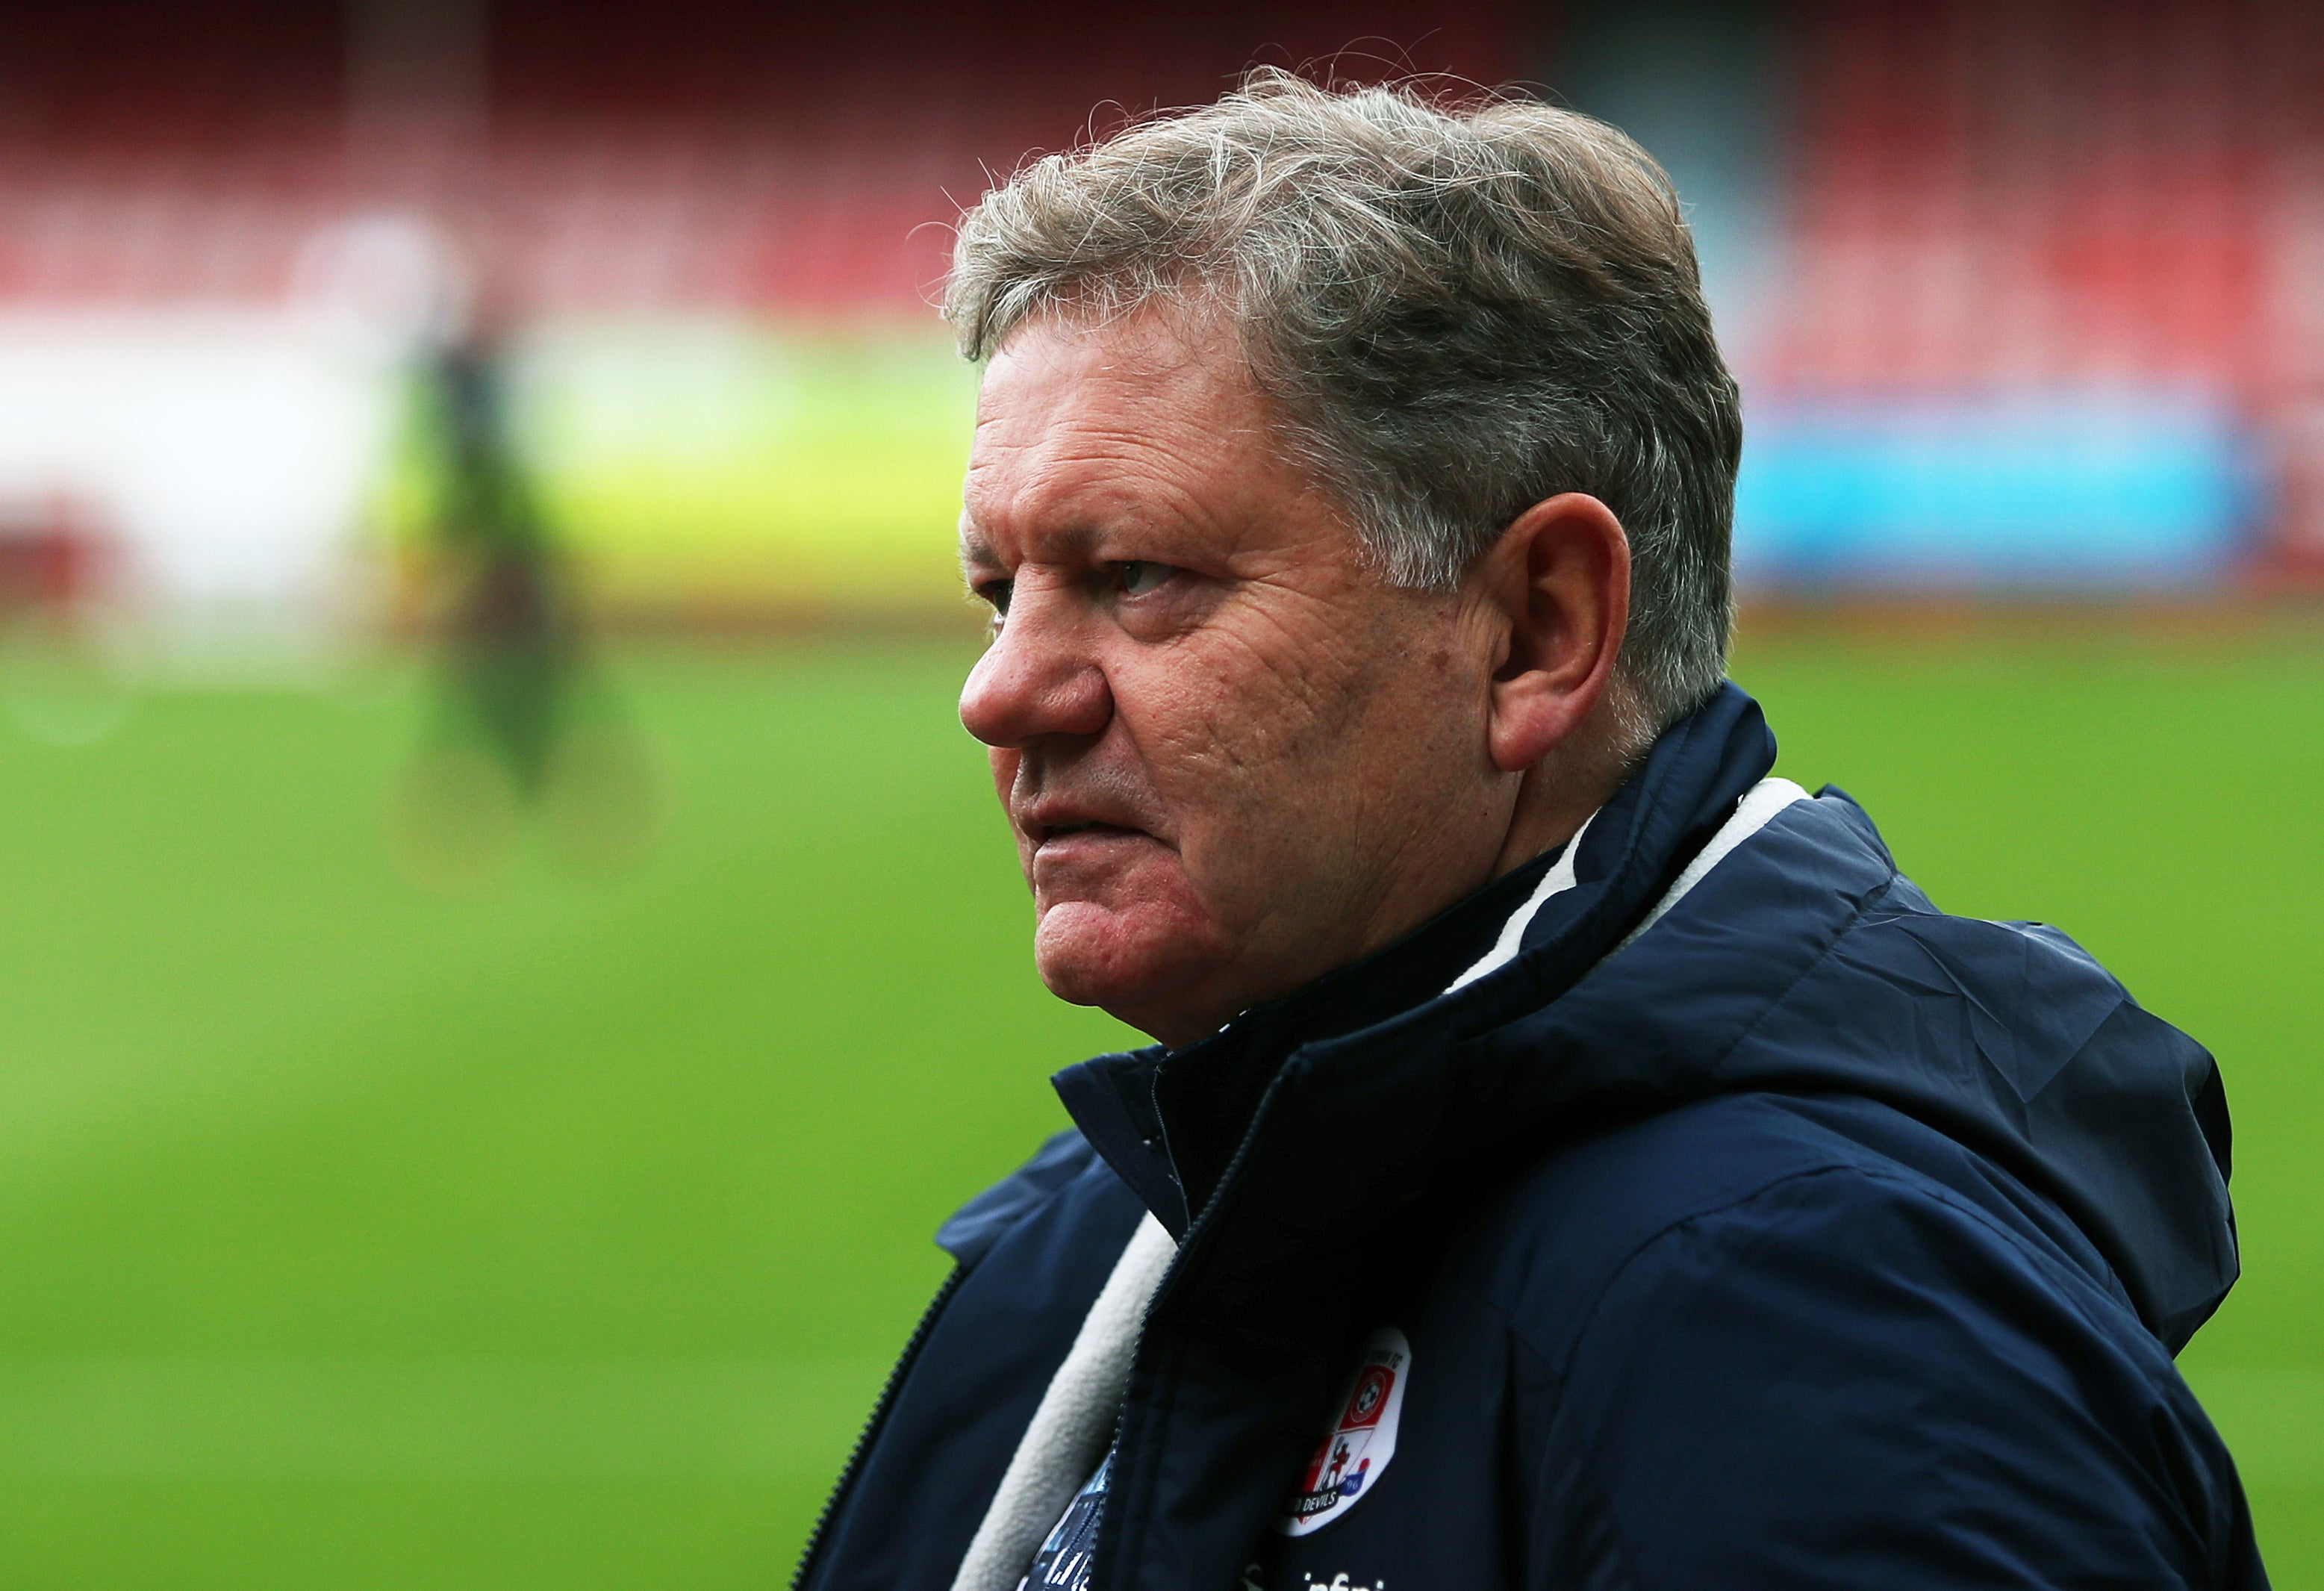 Crawley suspend manager John Yems after allegations of discrimination towards players The Independent pic